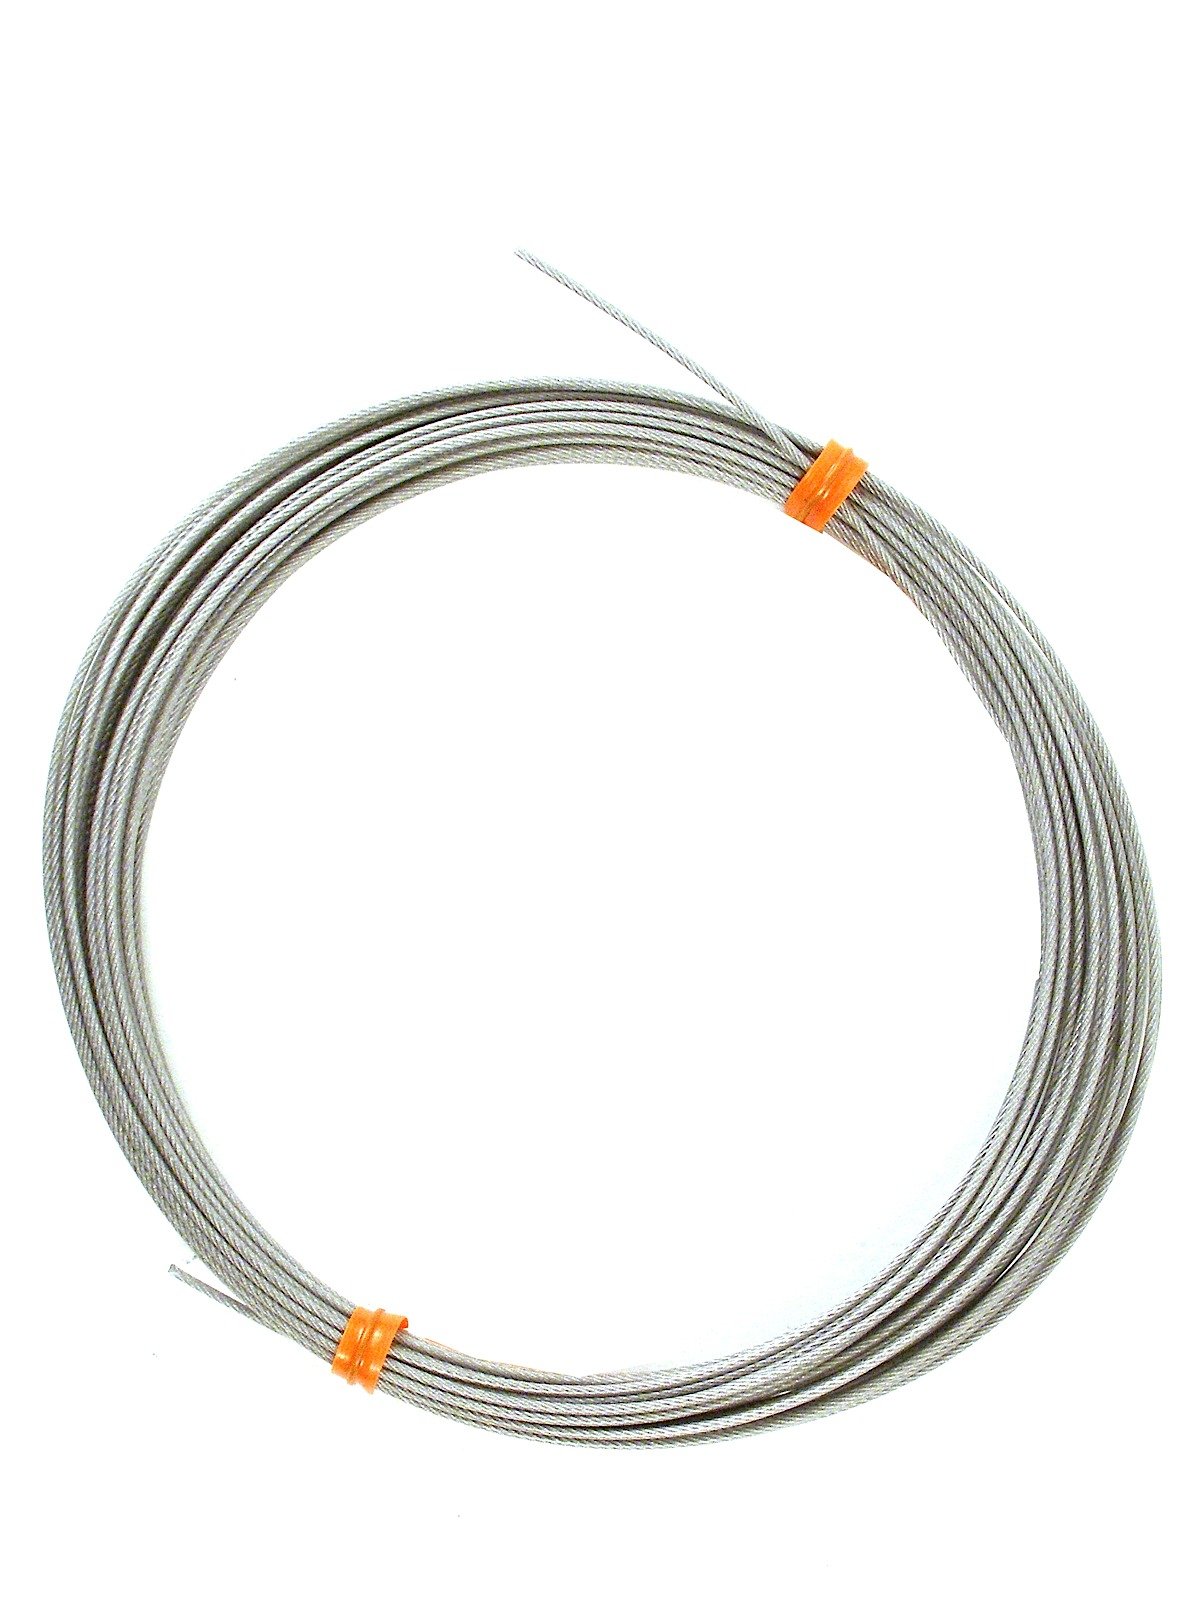 Mayline Replacement Cable for Straightedges